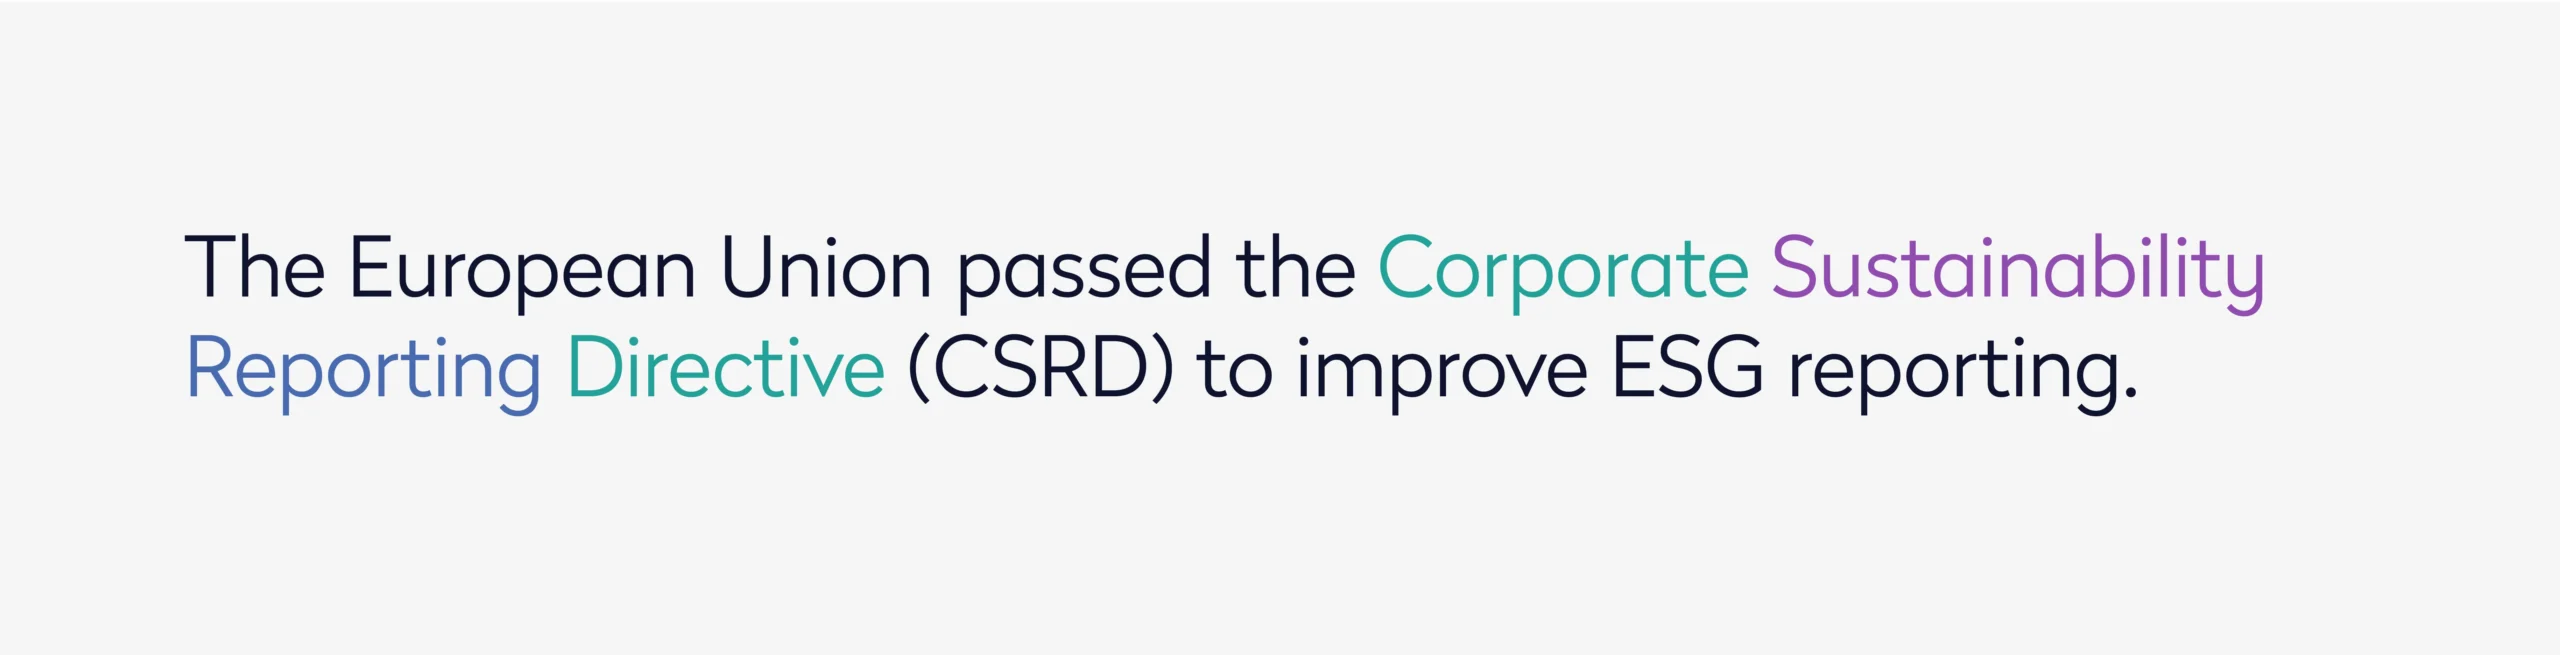 The European Union passed the Corporate Sustainability Reporting Directive CSRD to improve ESG reporting